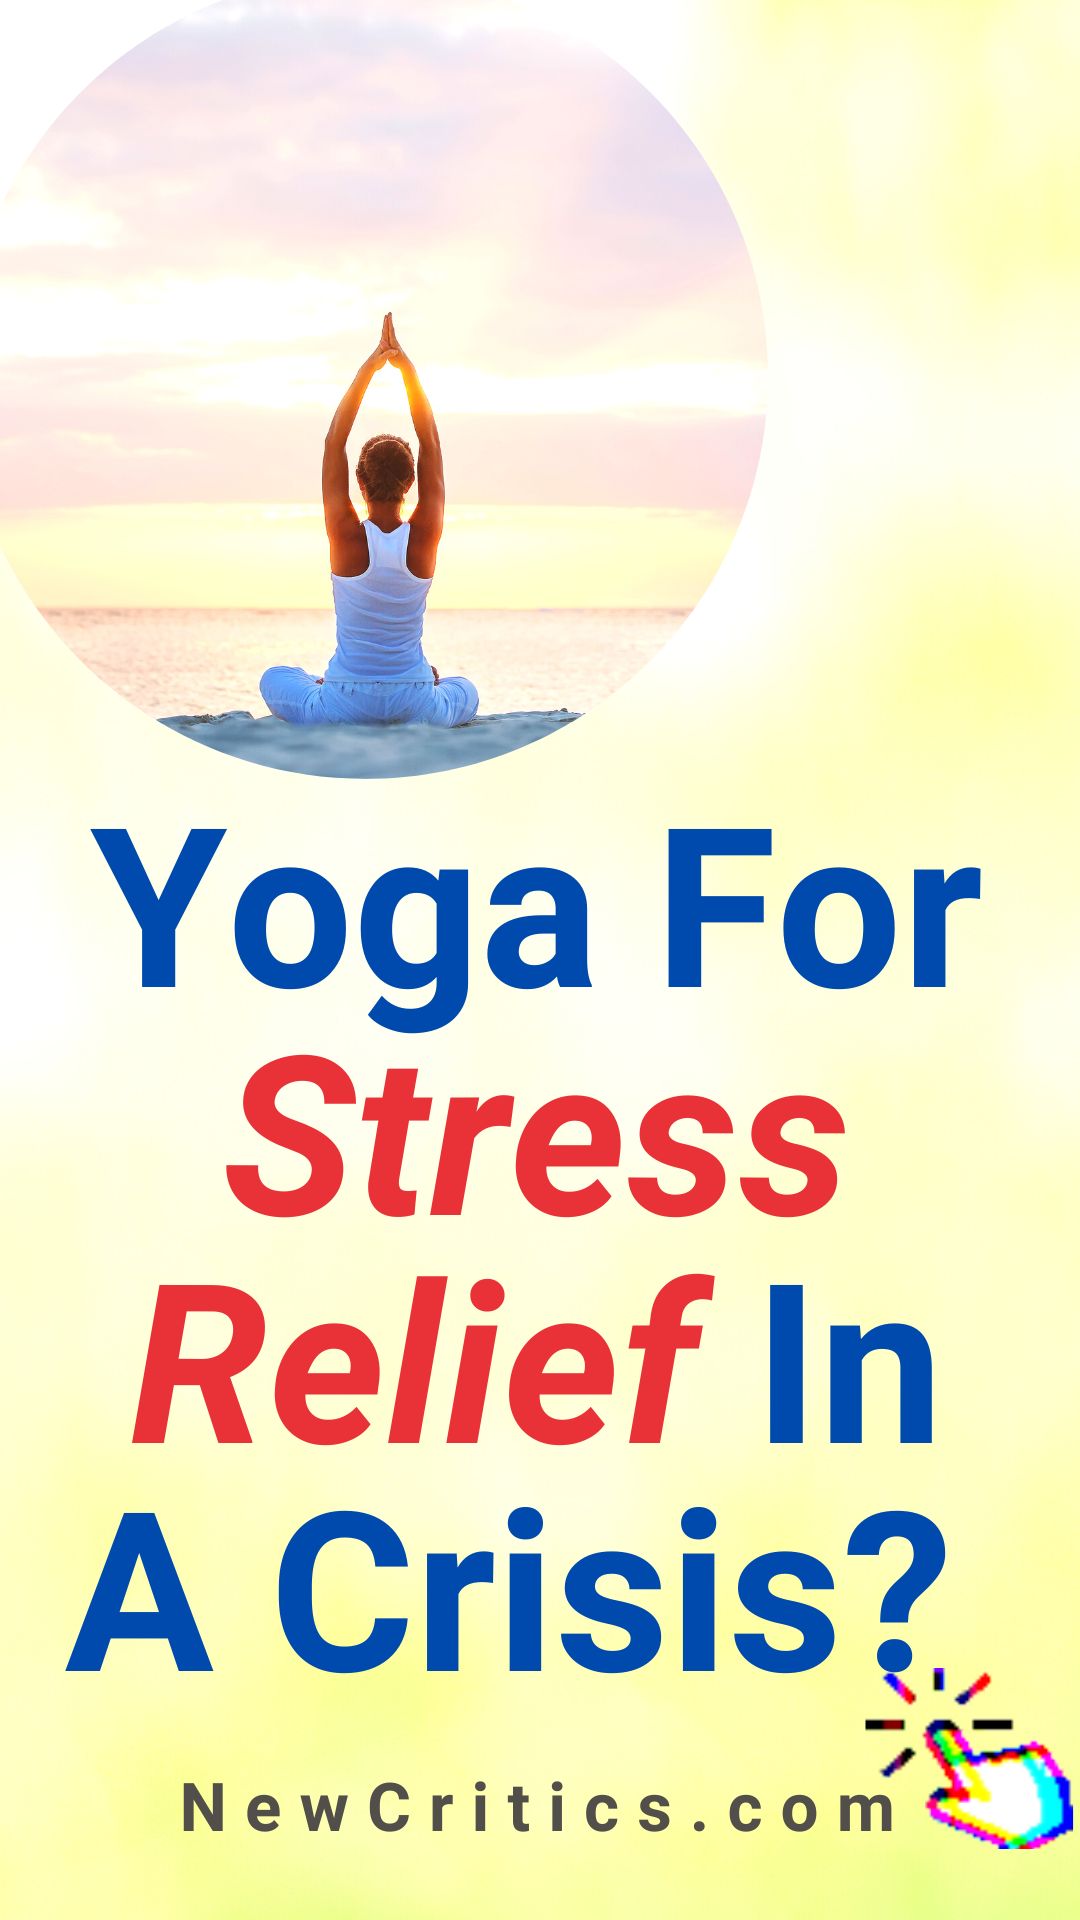 Yoga For Stress Relief In A Crisis / Canva